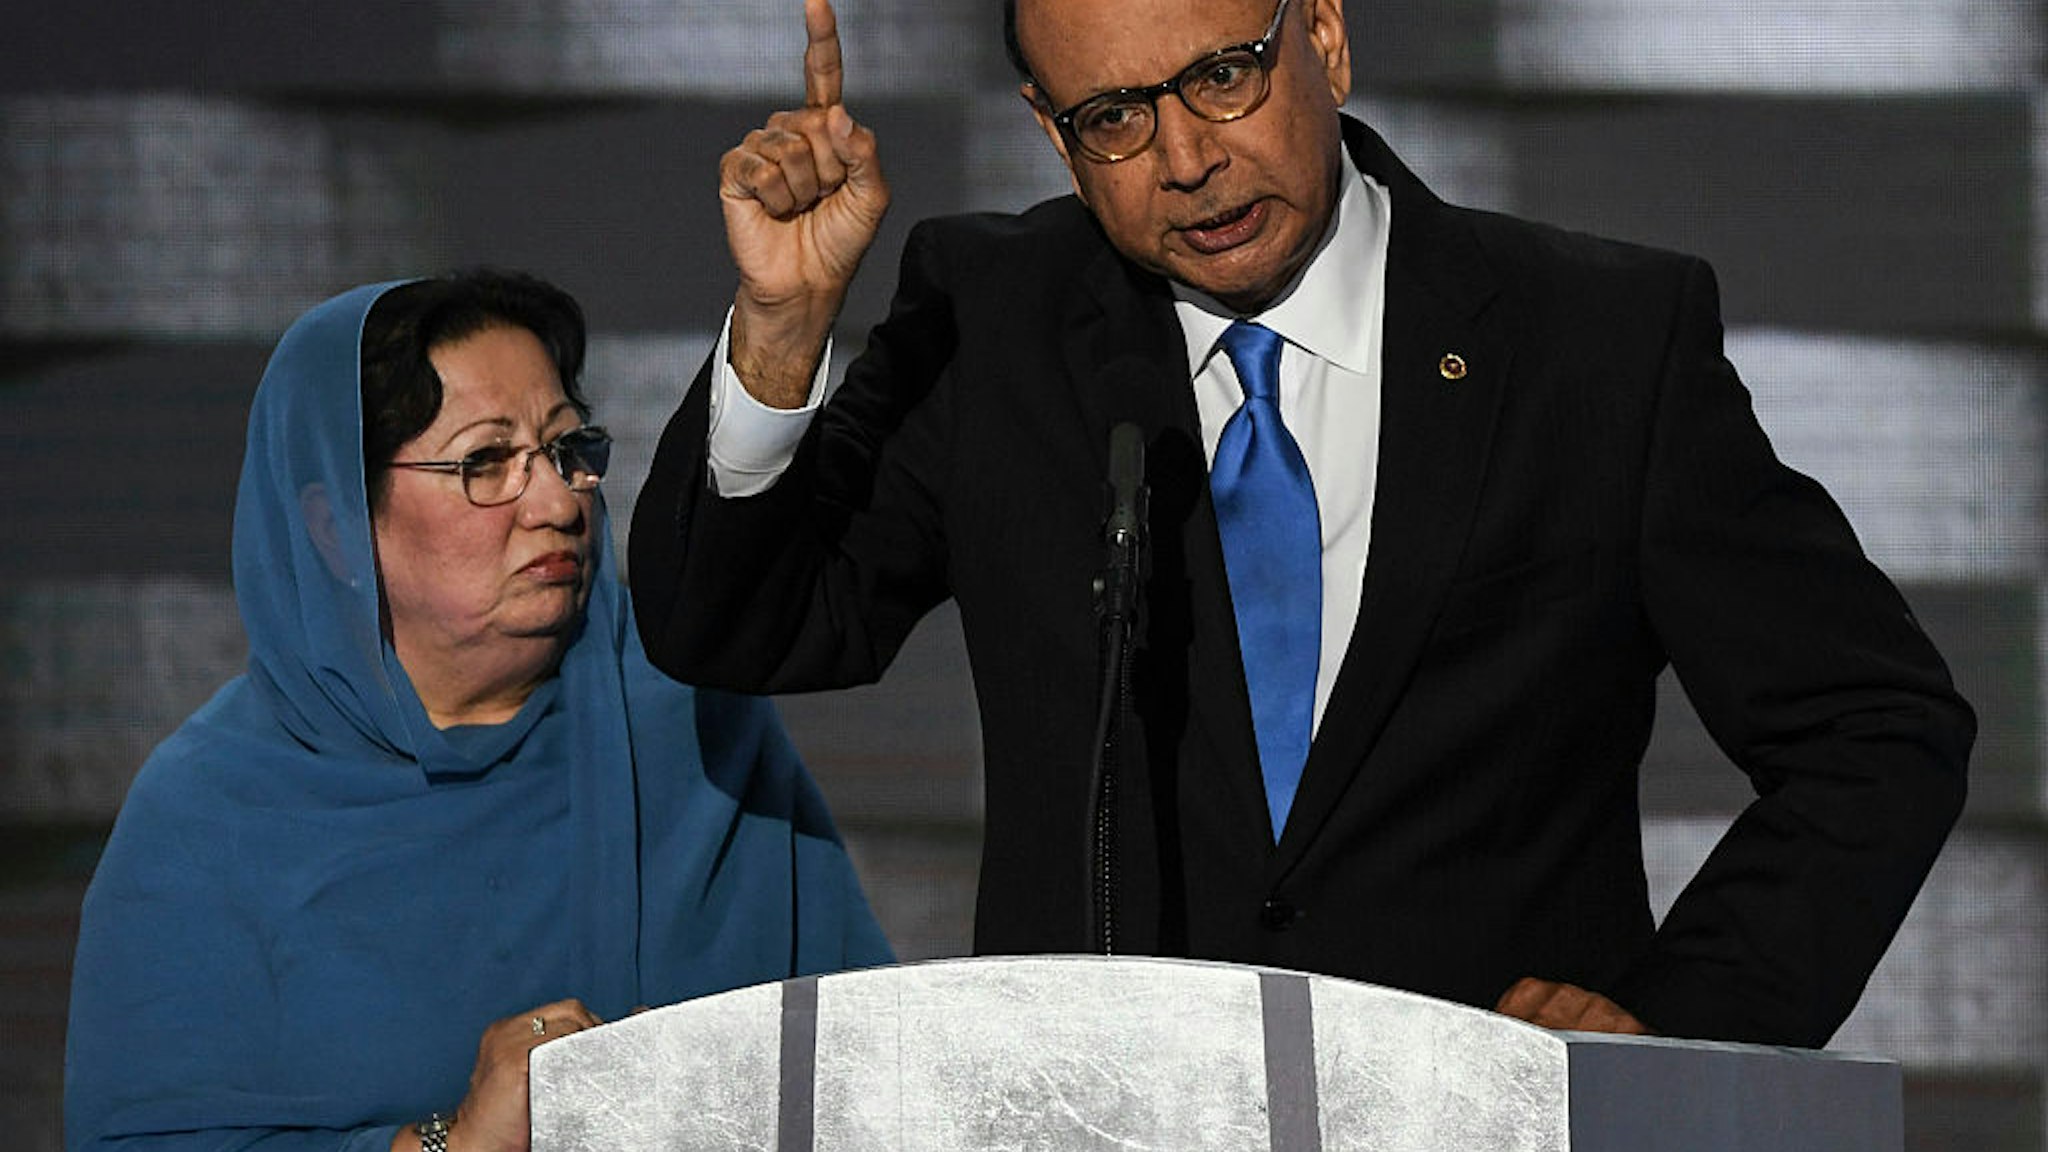 PHILADELPHIA, PA - JULY 28: Khzir Khan, the father of fallen soldier Humayun Kahn, addresses the crowd during the final day of the Democratic National Convention in Philadelphia on Thursday, July 28, 2016. (Photo by Toni L. Sandys/The Washington Post via Getty Images)